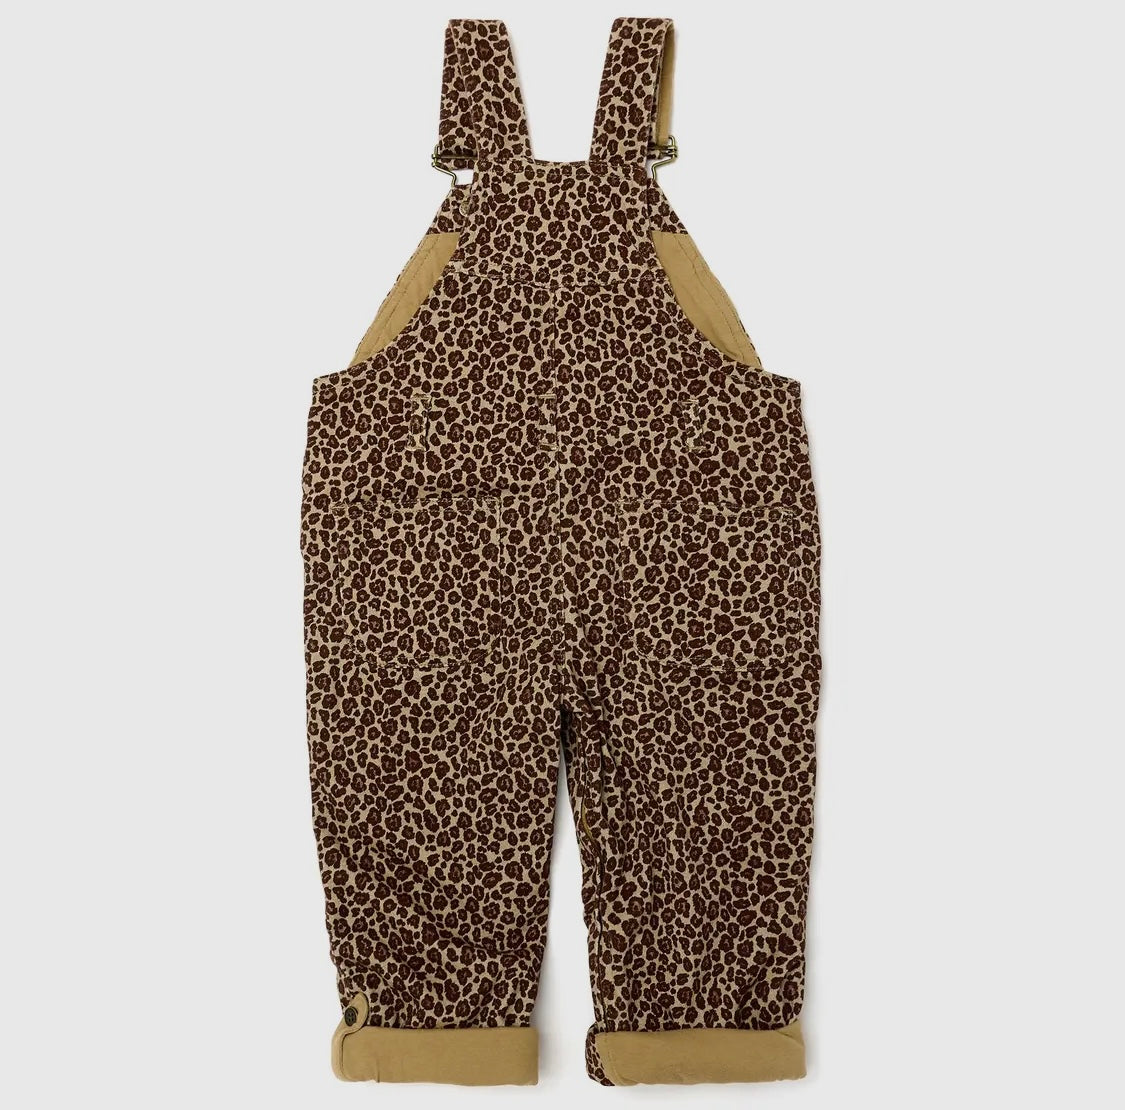 kids 100 % cotton dotty dungarees leopard brown tan animal print overalls adjustable straps rolled cuffs button cuffs back pockets